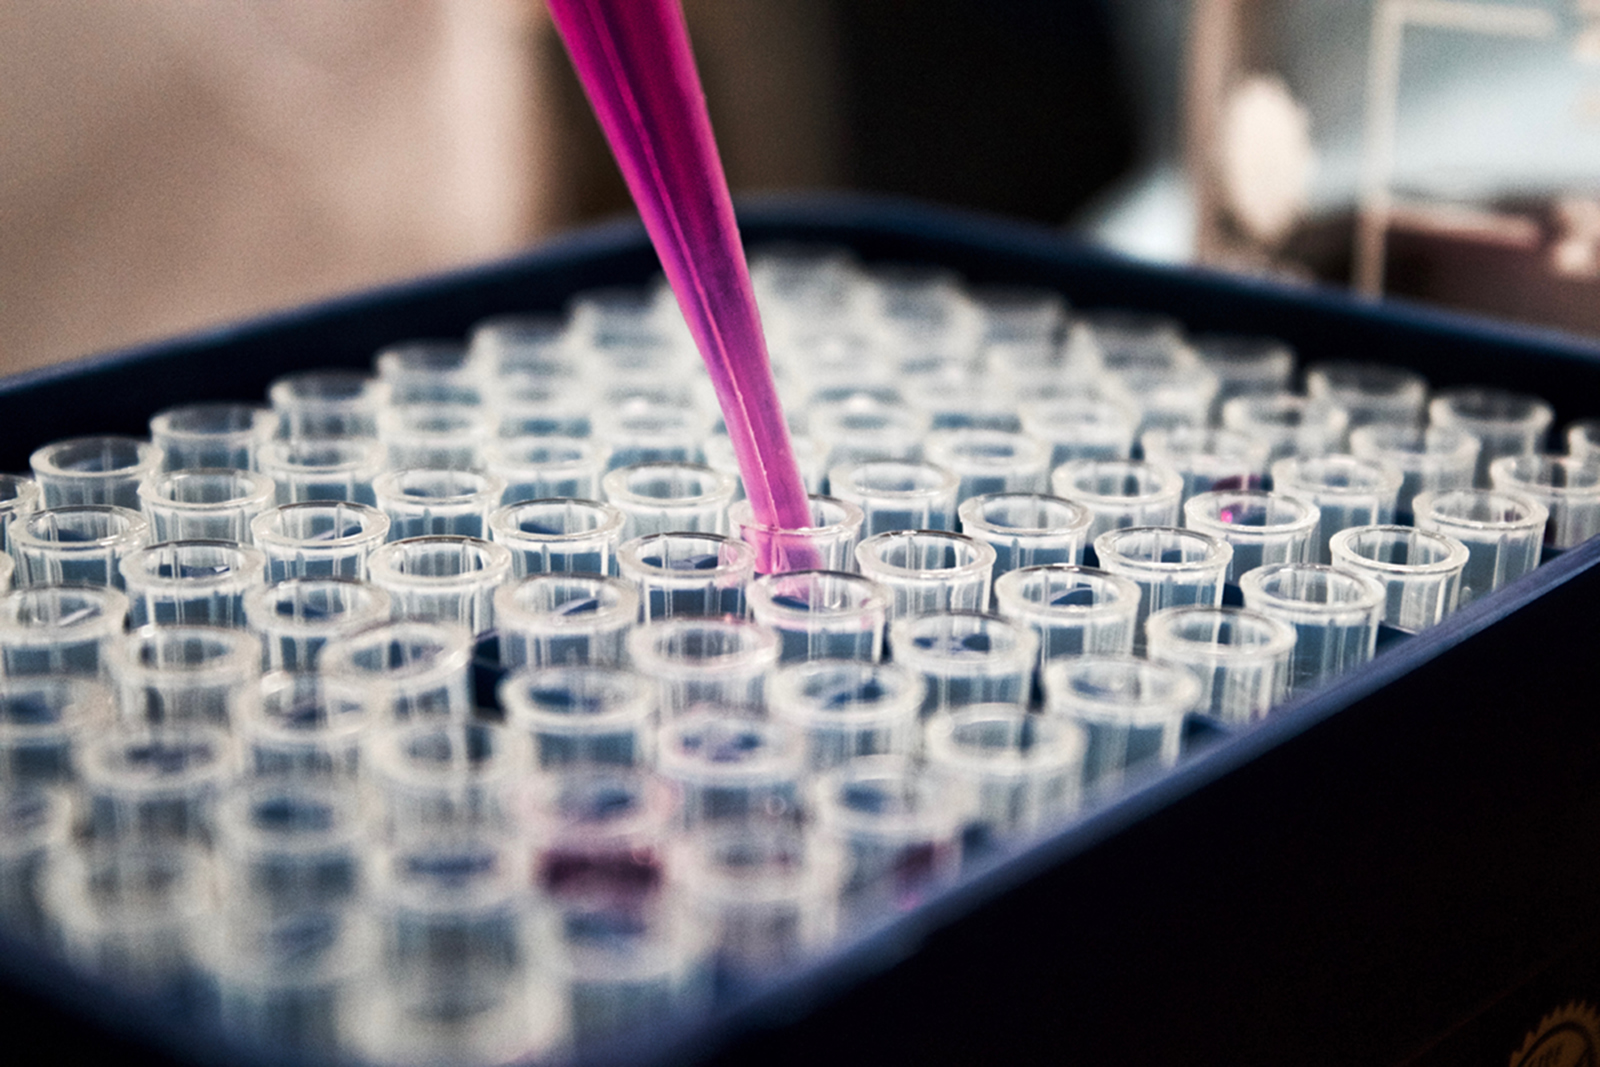 A photo shows a purple pipette tip going into a small, clear vial, which is surrounded by dozens of identical vials.